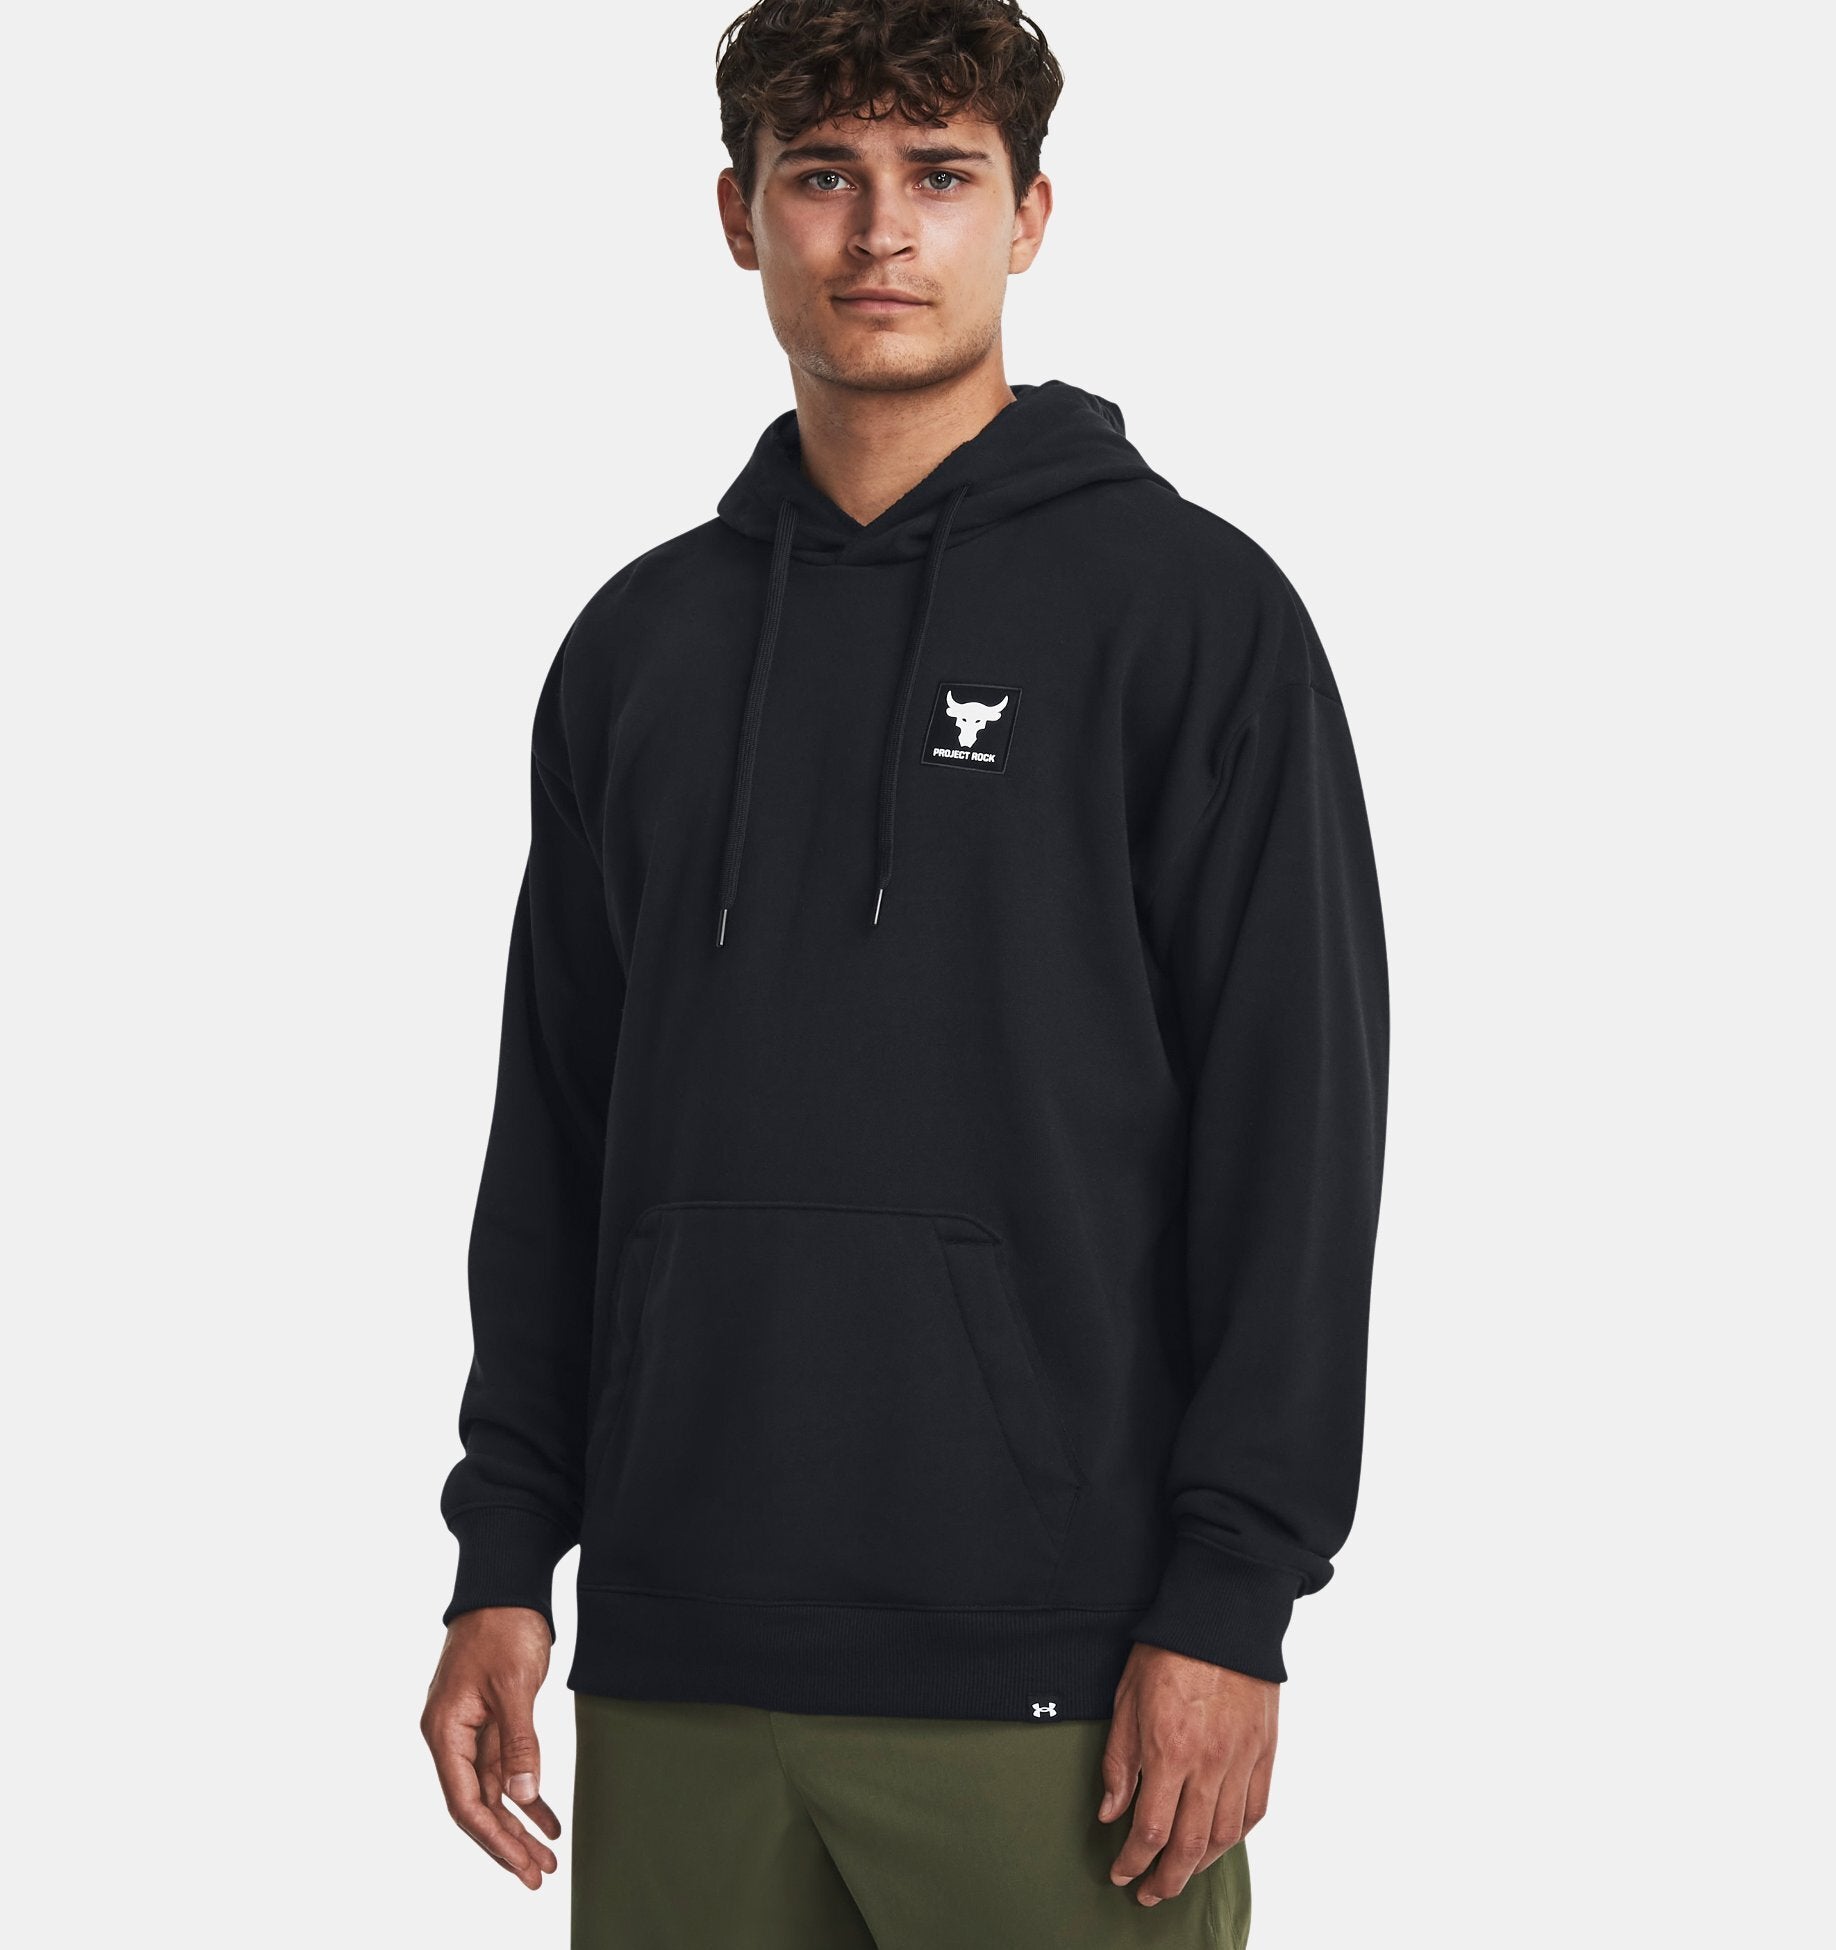 Under Armour Men's Project Rock Heavyweight Terry Hoodie Black